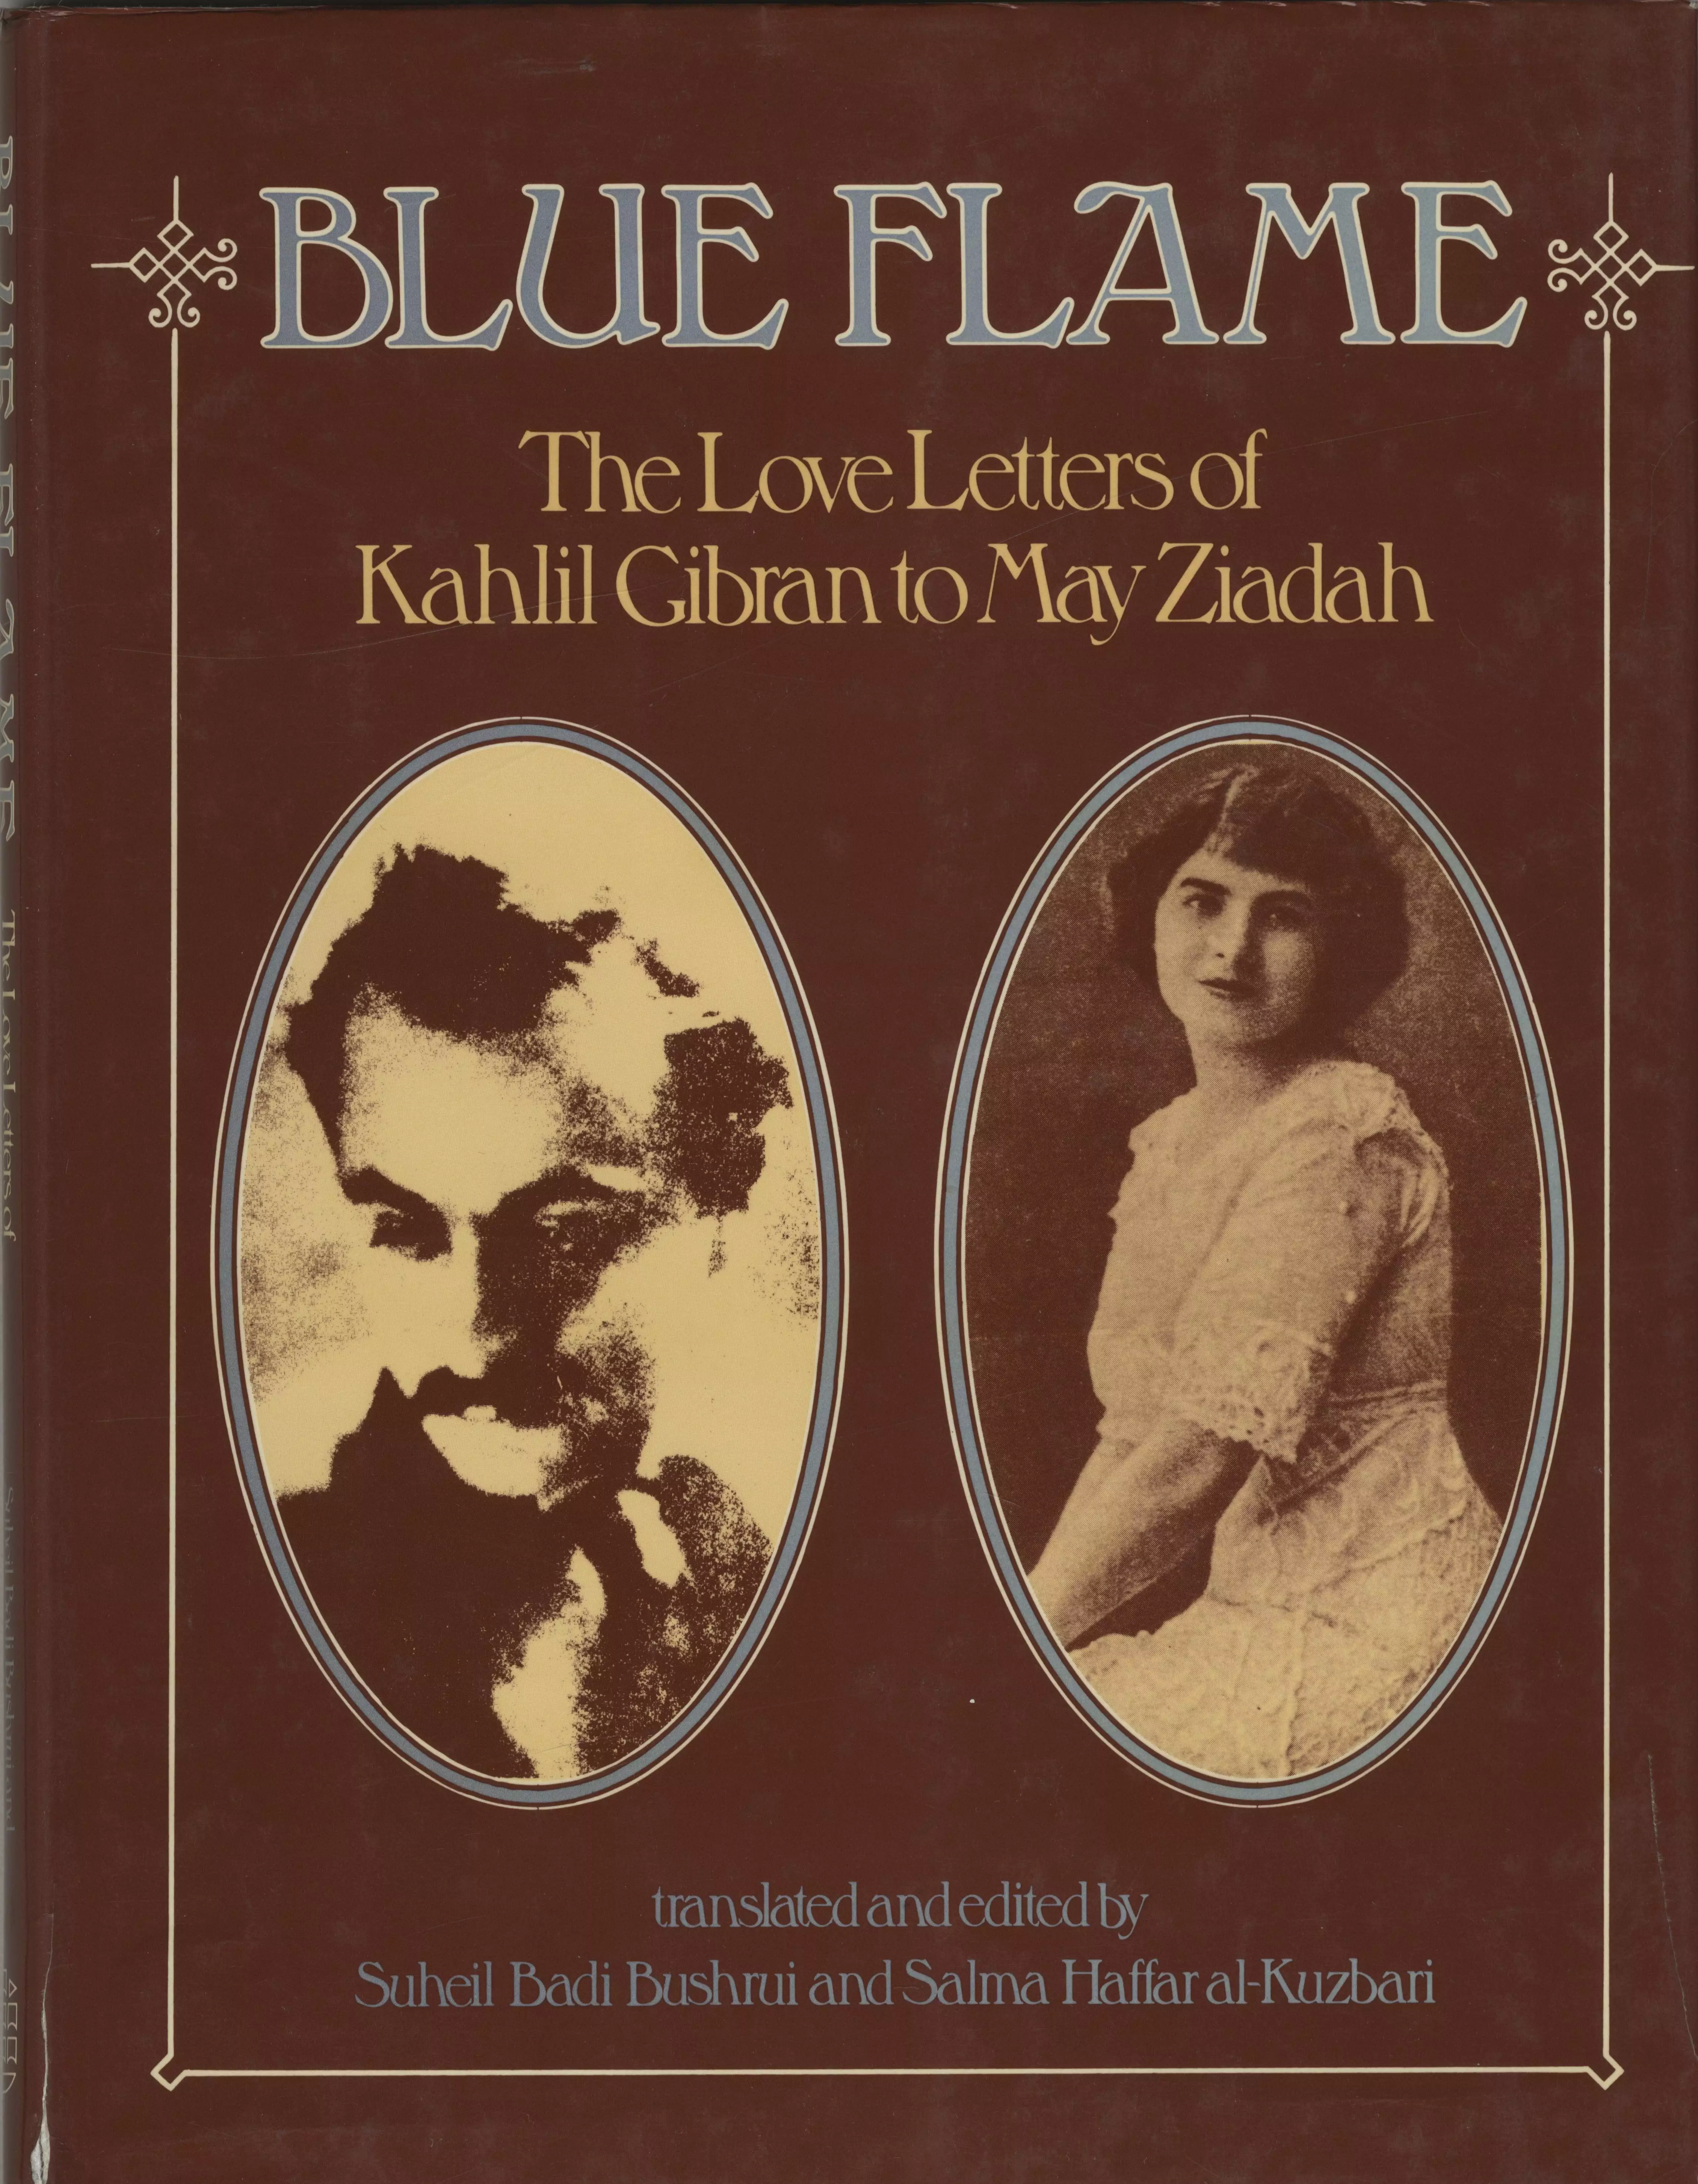 The Love Letters of Kahlil Gibran to May Ziadah Love Letters